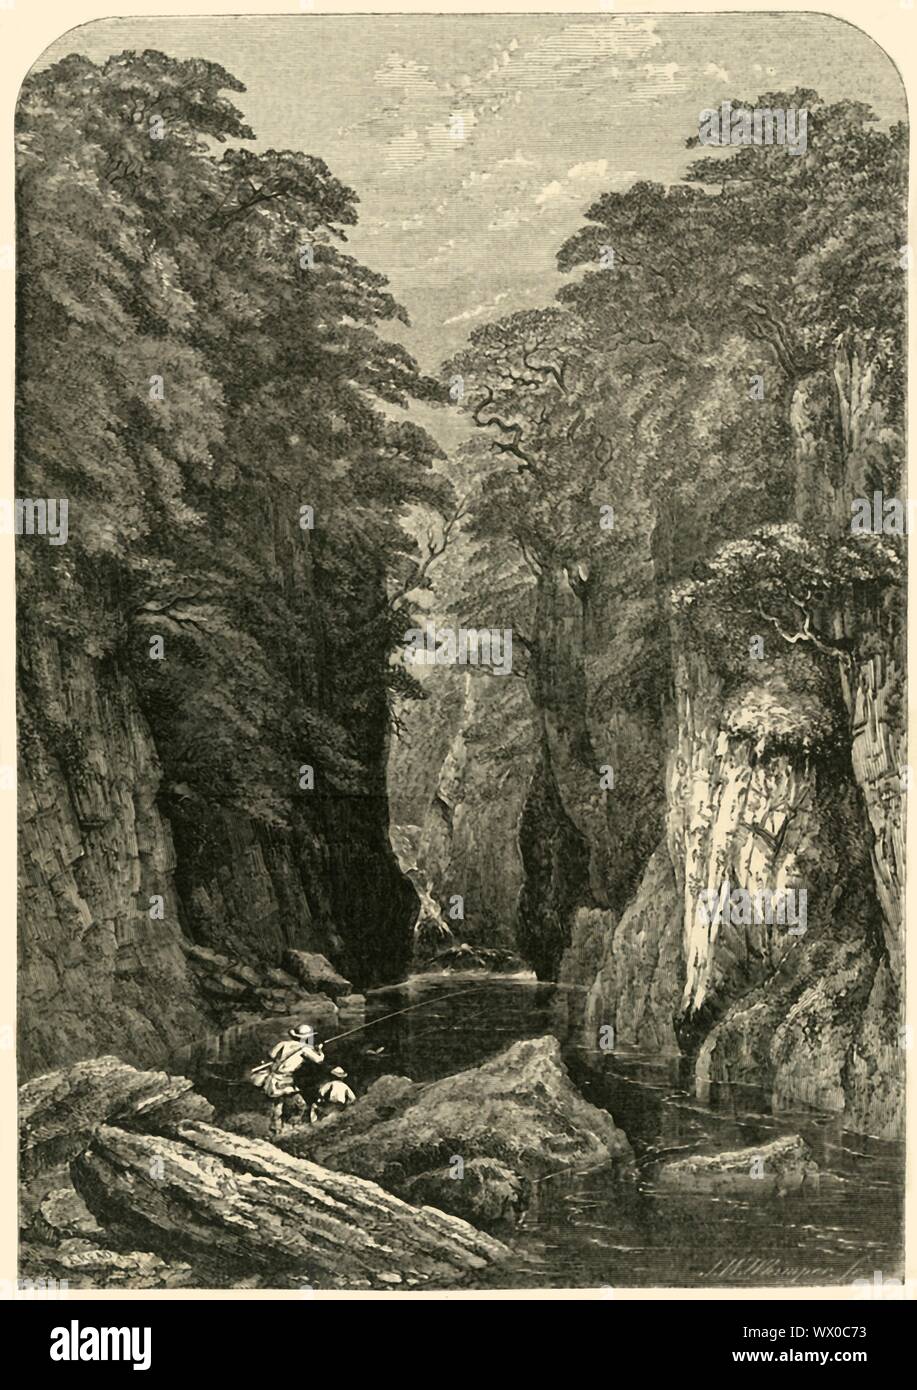 'Fors Nothyn', North Wales, c1850. River running through a steep-sided gorge. From &quot;The Land We Live in: A Pictorial and Literary Sketch-book of the British Empire&quot;. [Charles Knight, London, c1850] Stock Photo